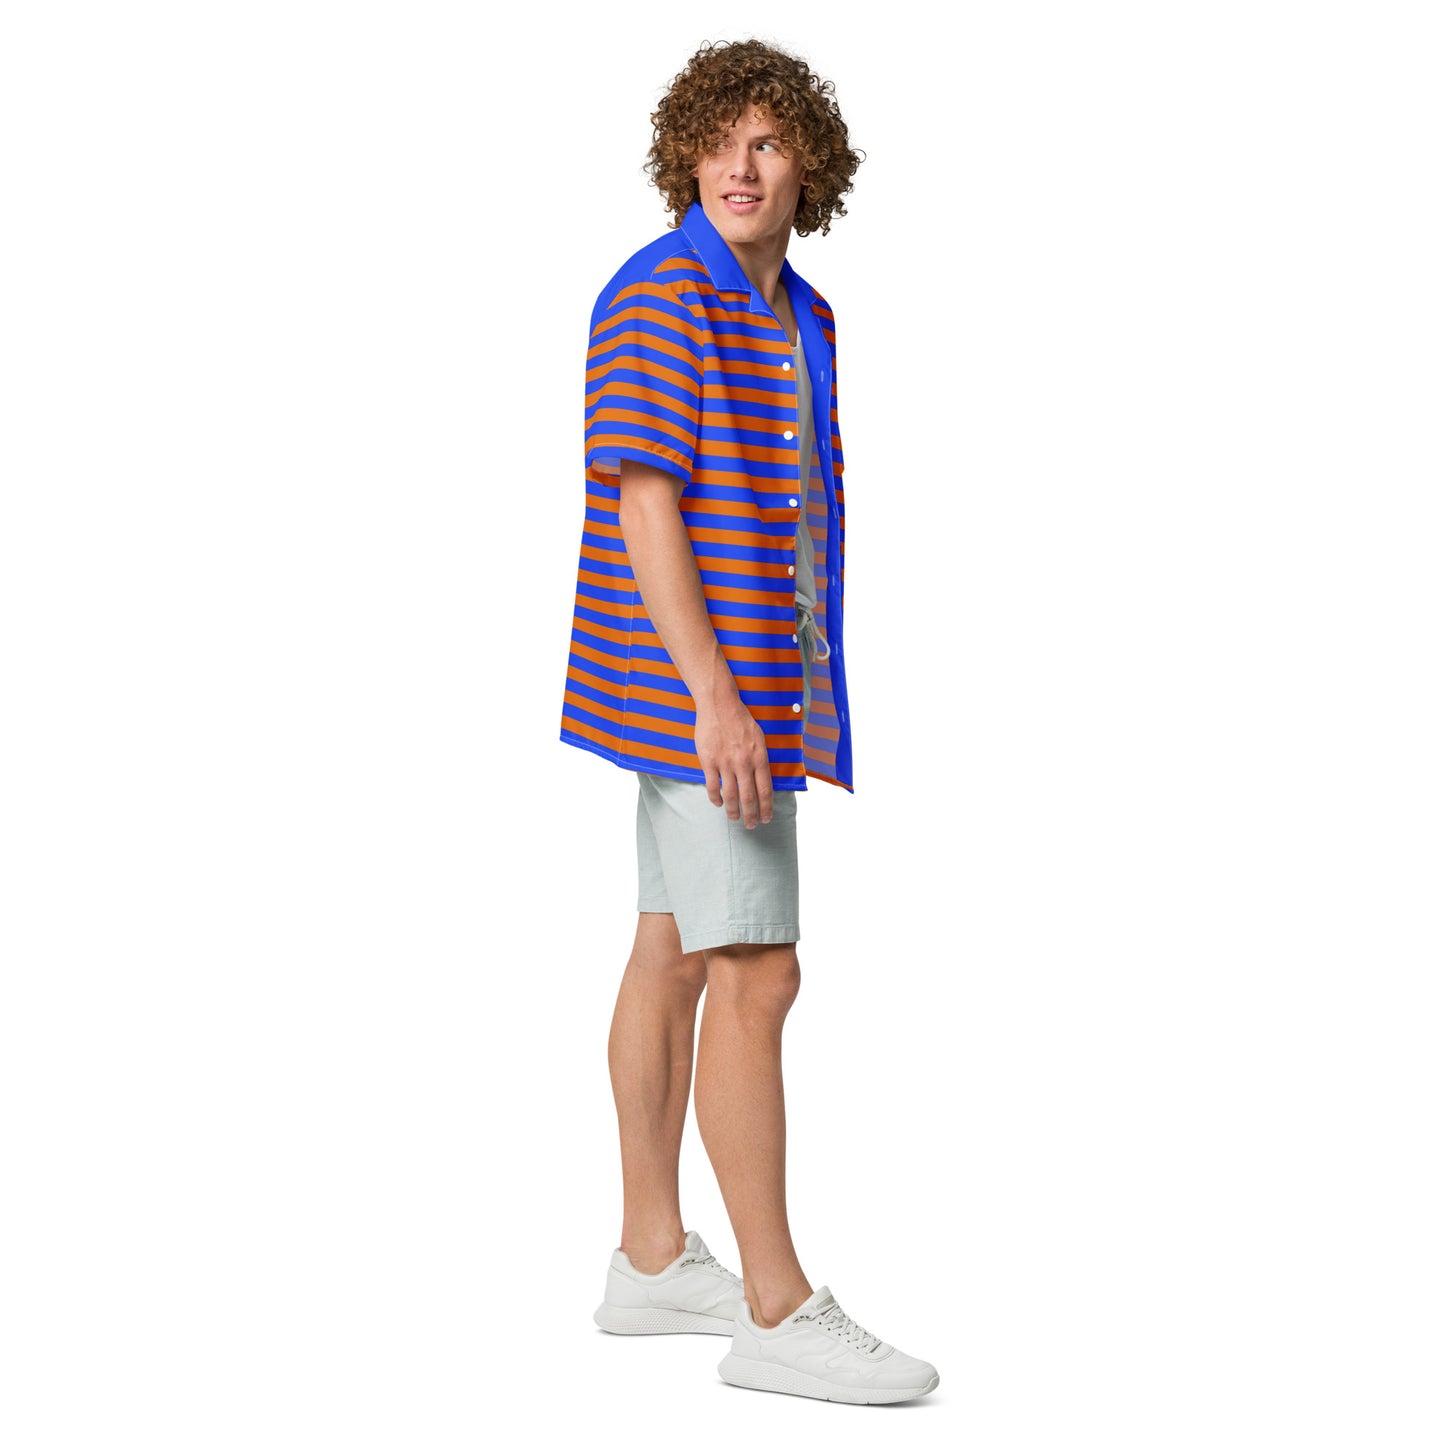 Blue and orange striped button-up shirt, short sleeve.